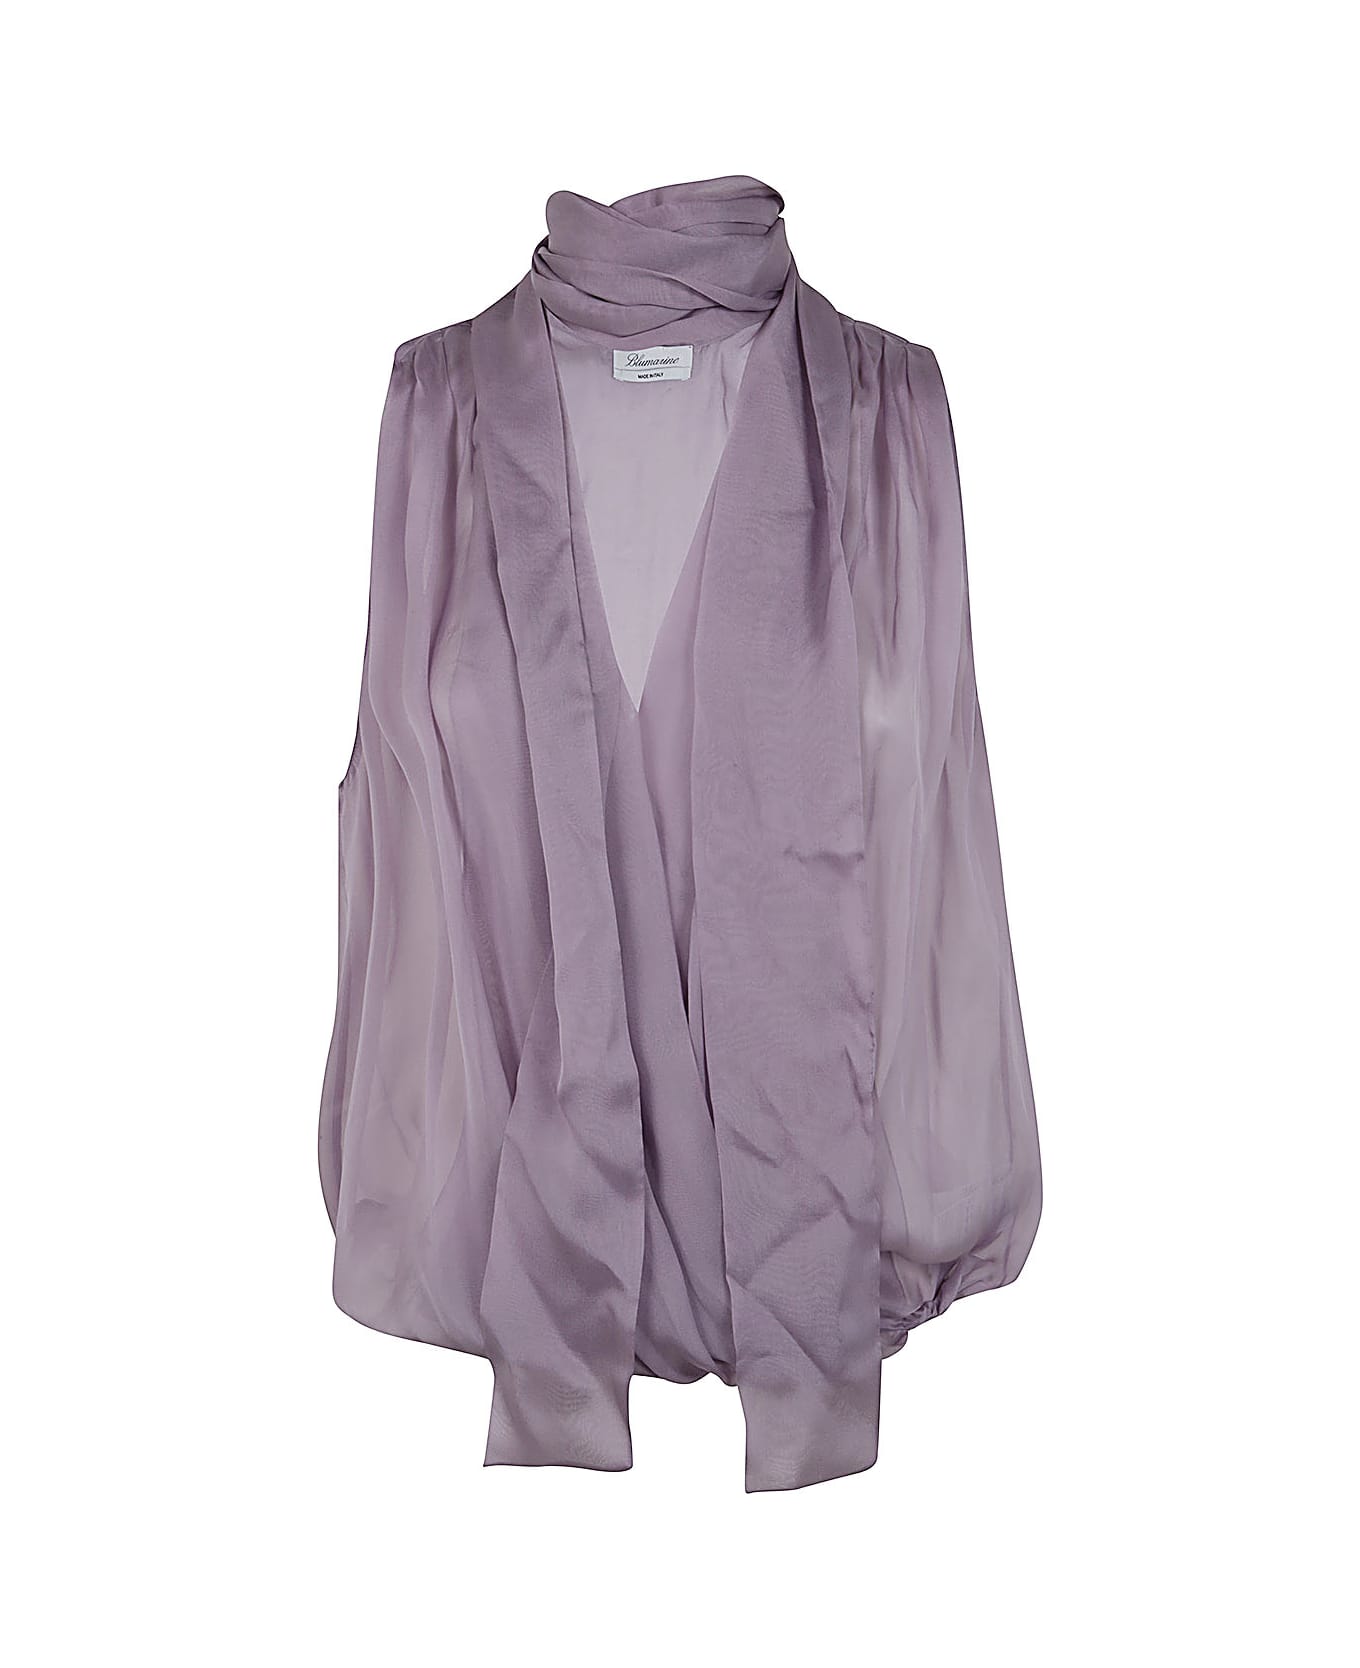 Blumarine 4c091a Blouse With Bow - Lavender